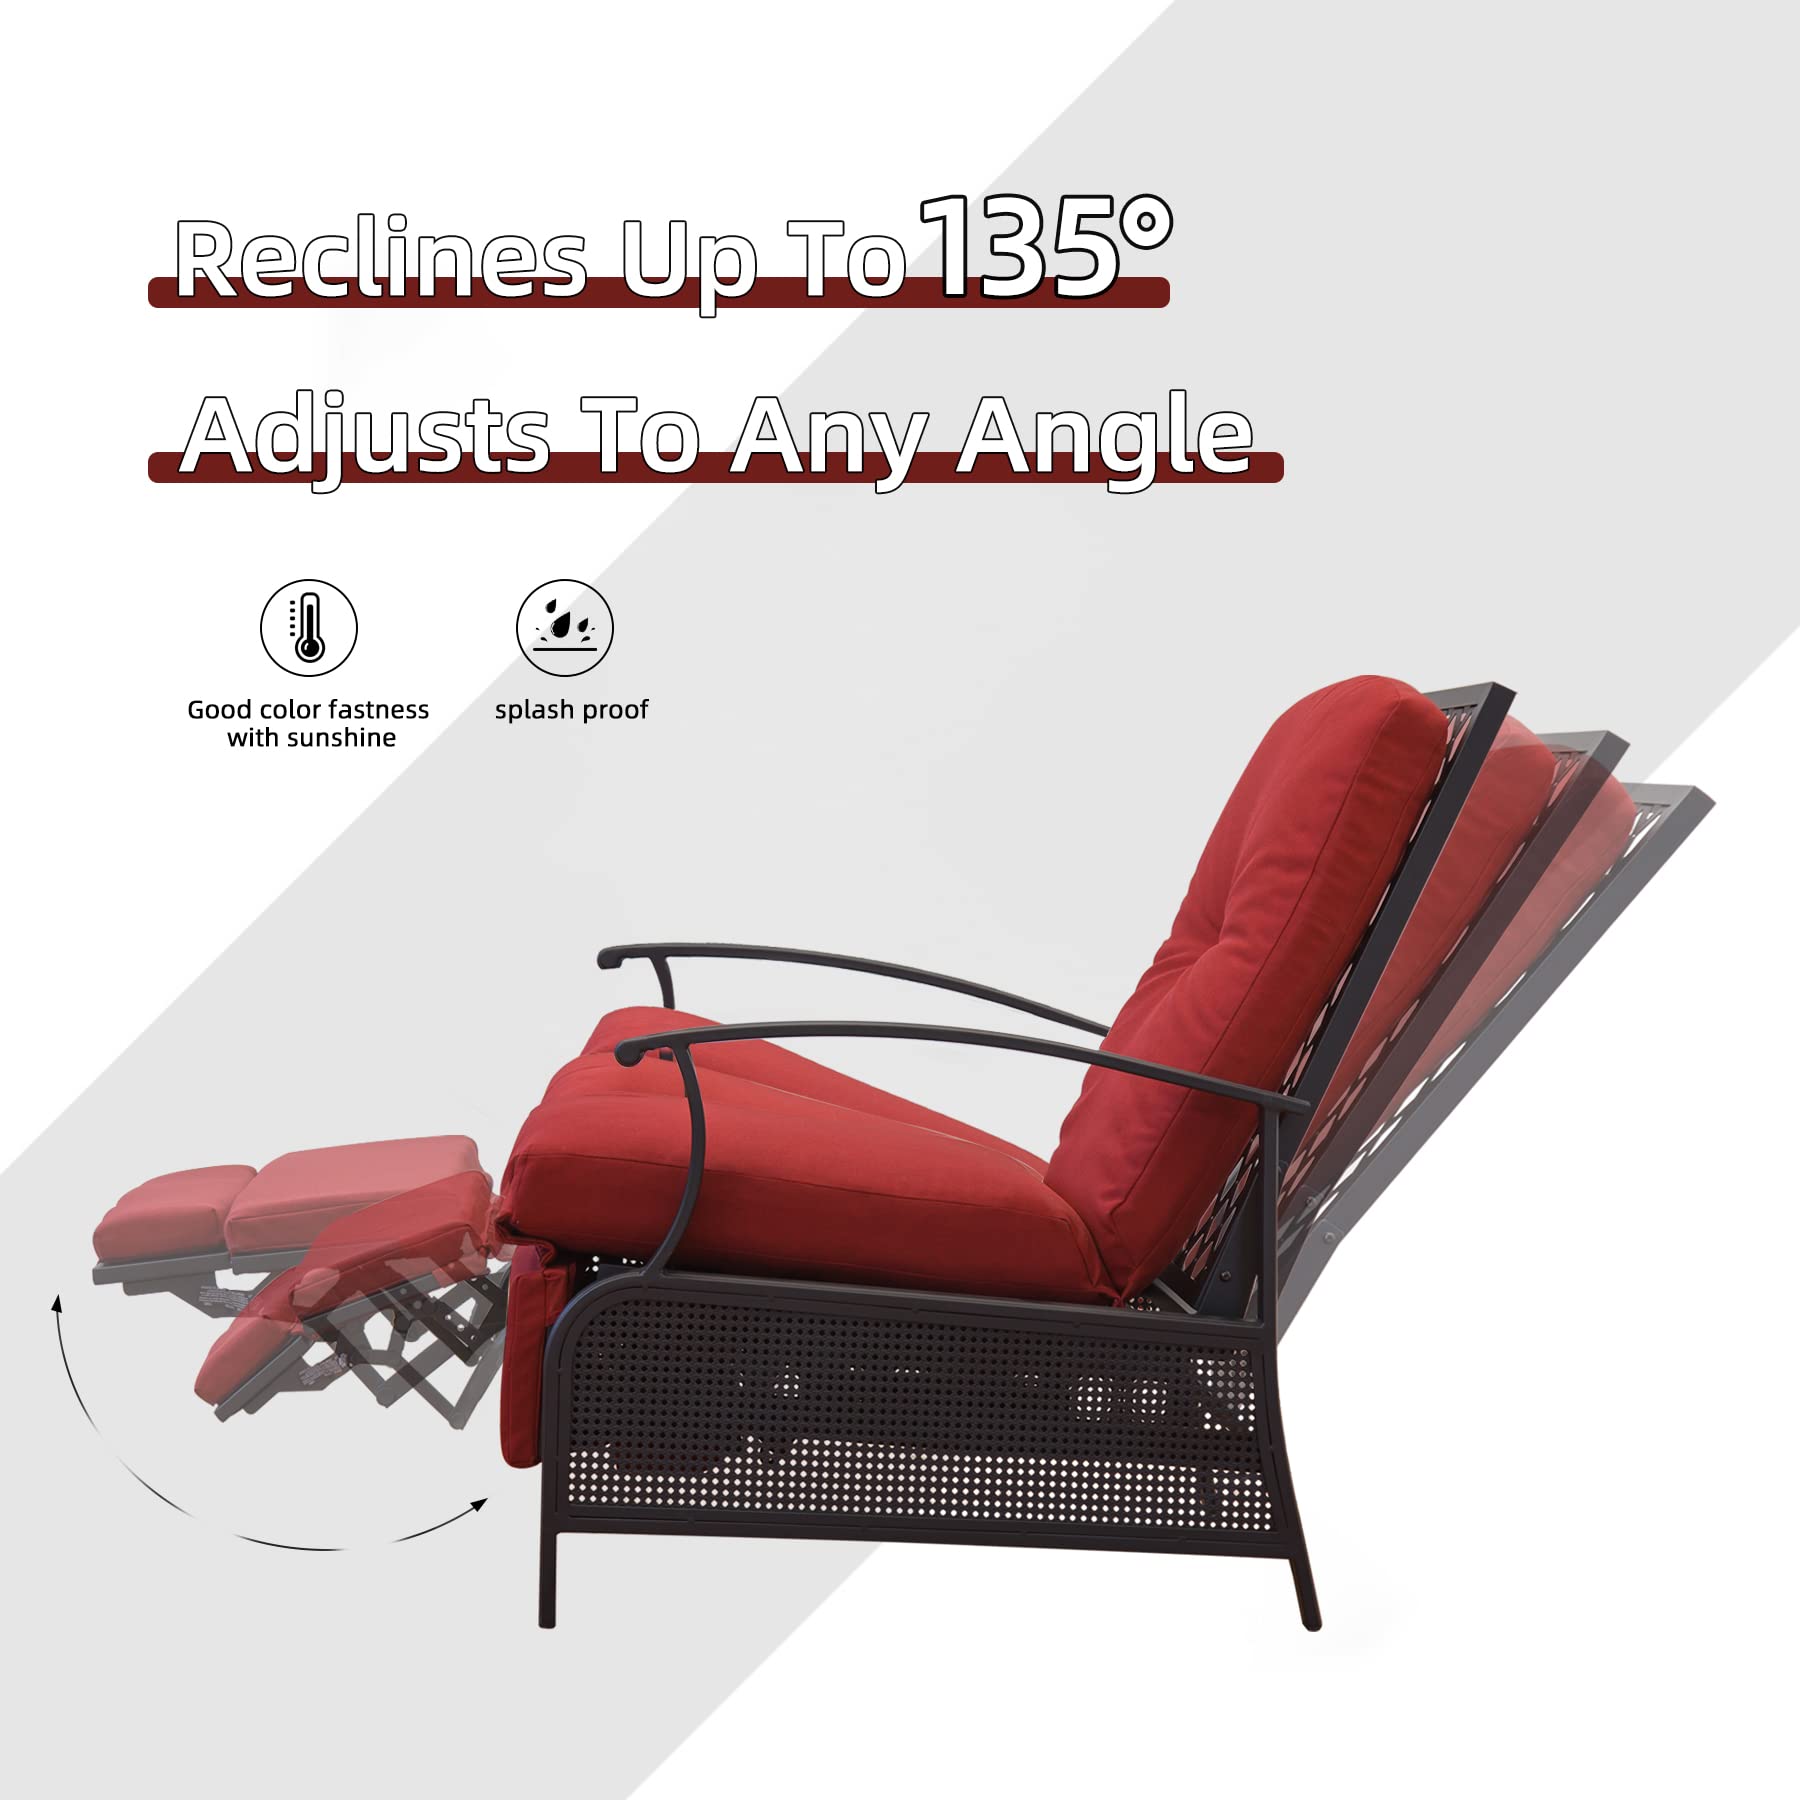 Domi Outdoor Living Adjustable Recliner Chair, Metal Reclining Lounge Chair, Remova Patio Chair - image 3 of 7